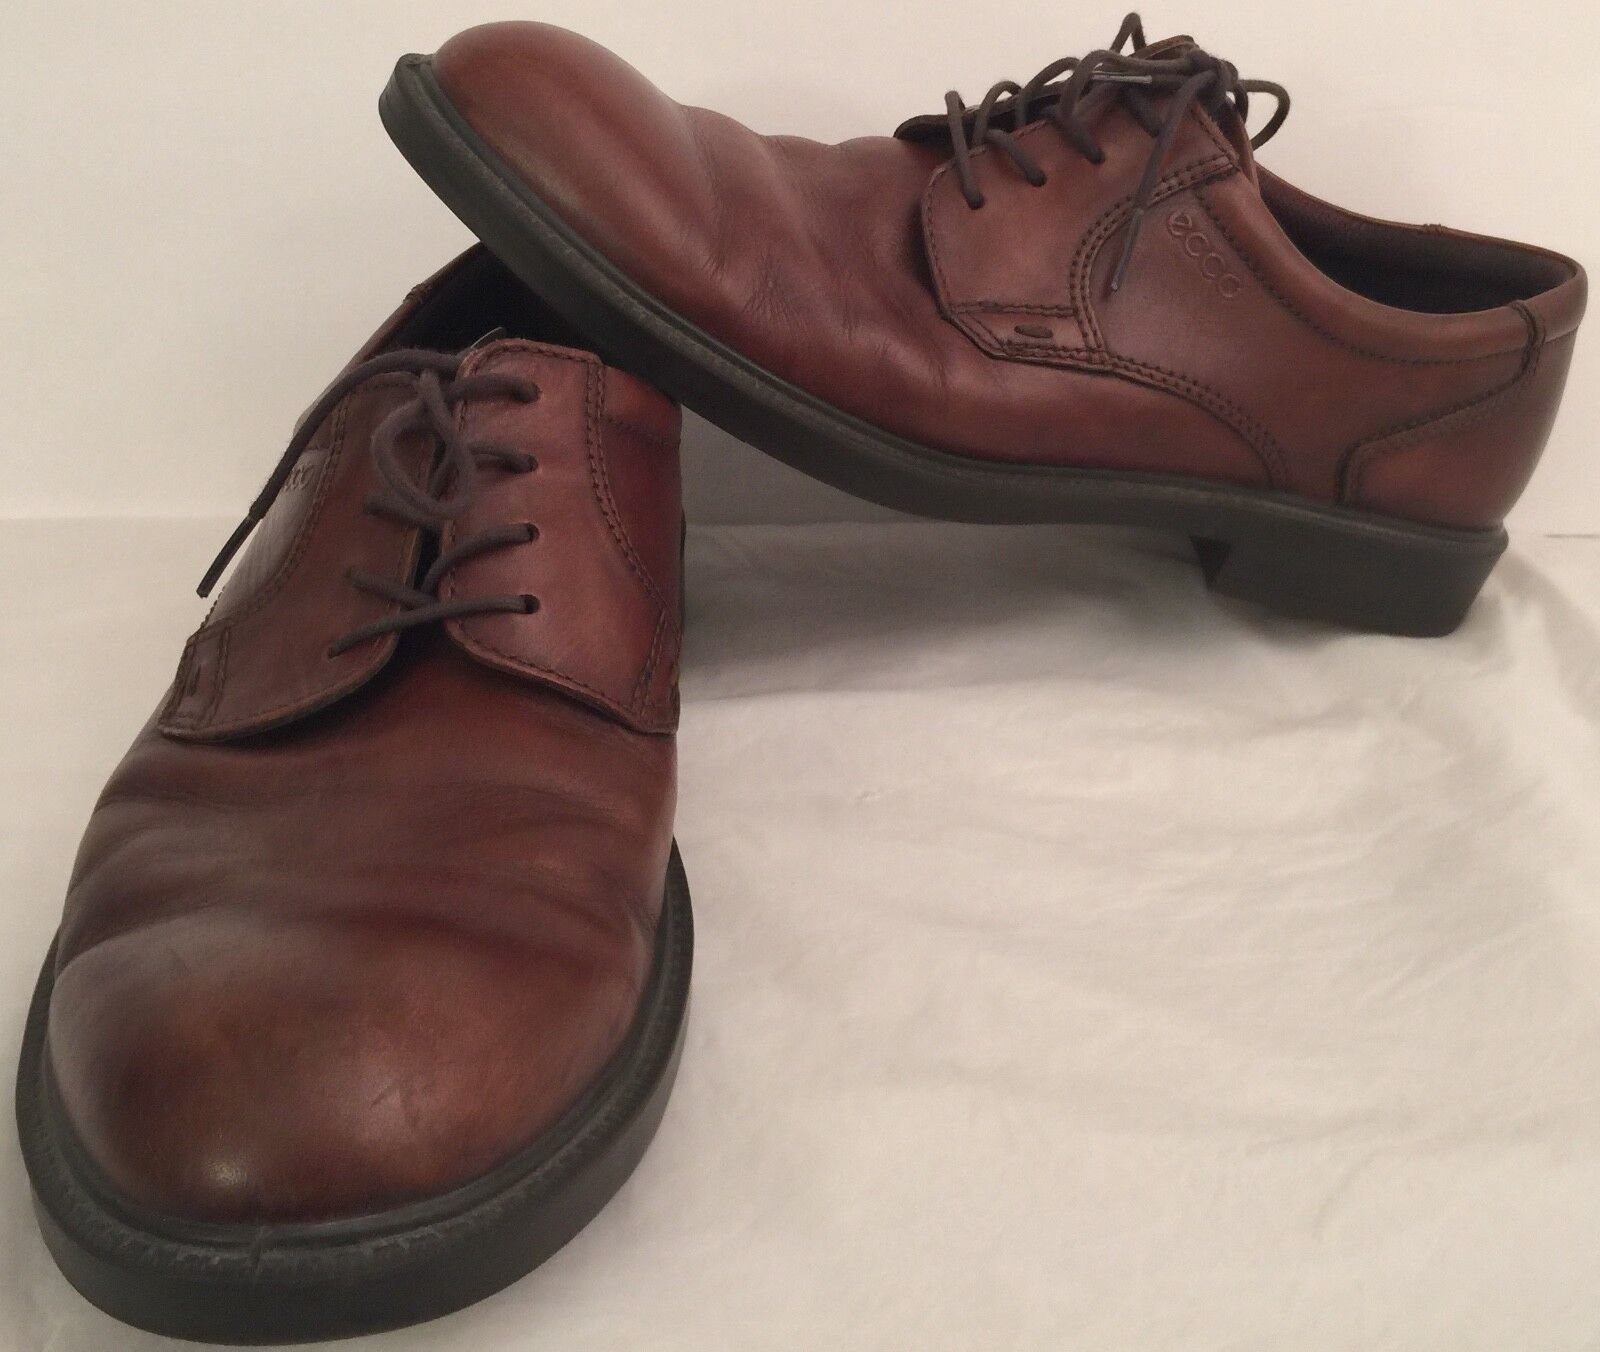 Primary image for Ecco Atlanta Plain Toe Brown Derby Oxford Shoes Sz 45 Euro 11-11.5 US Lace Up